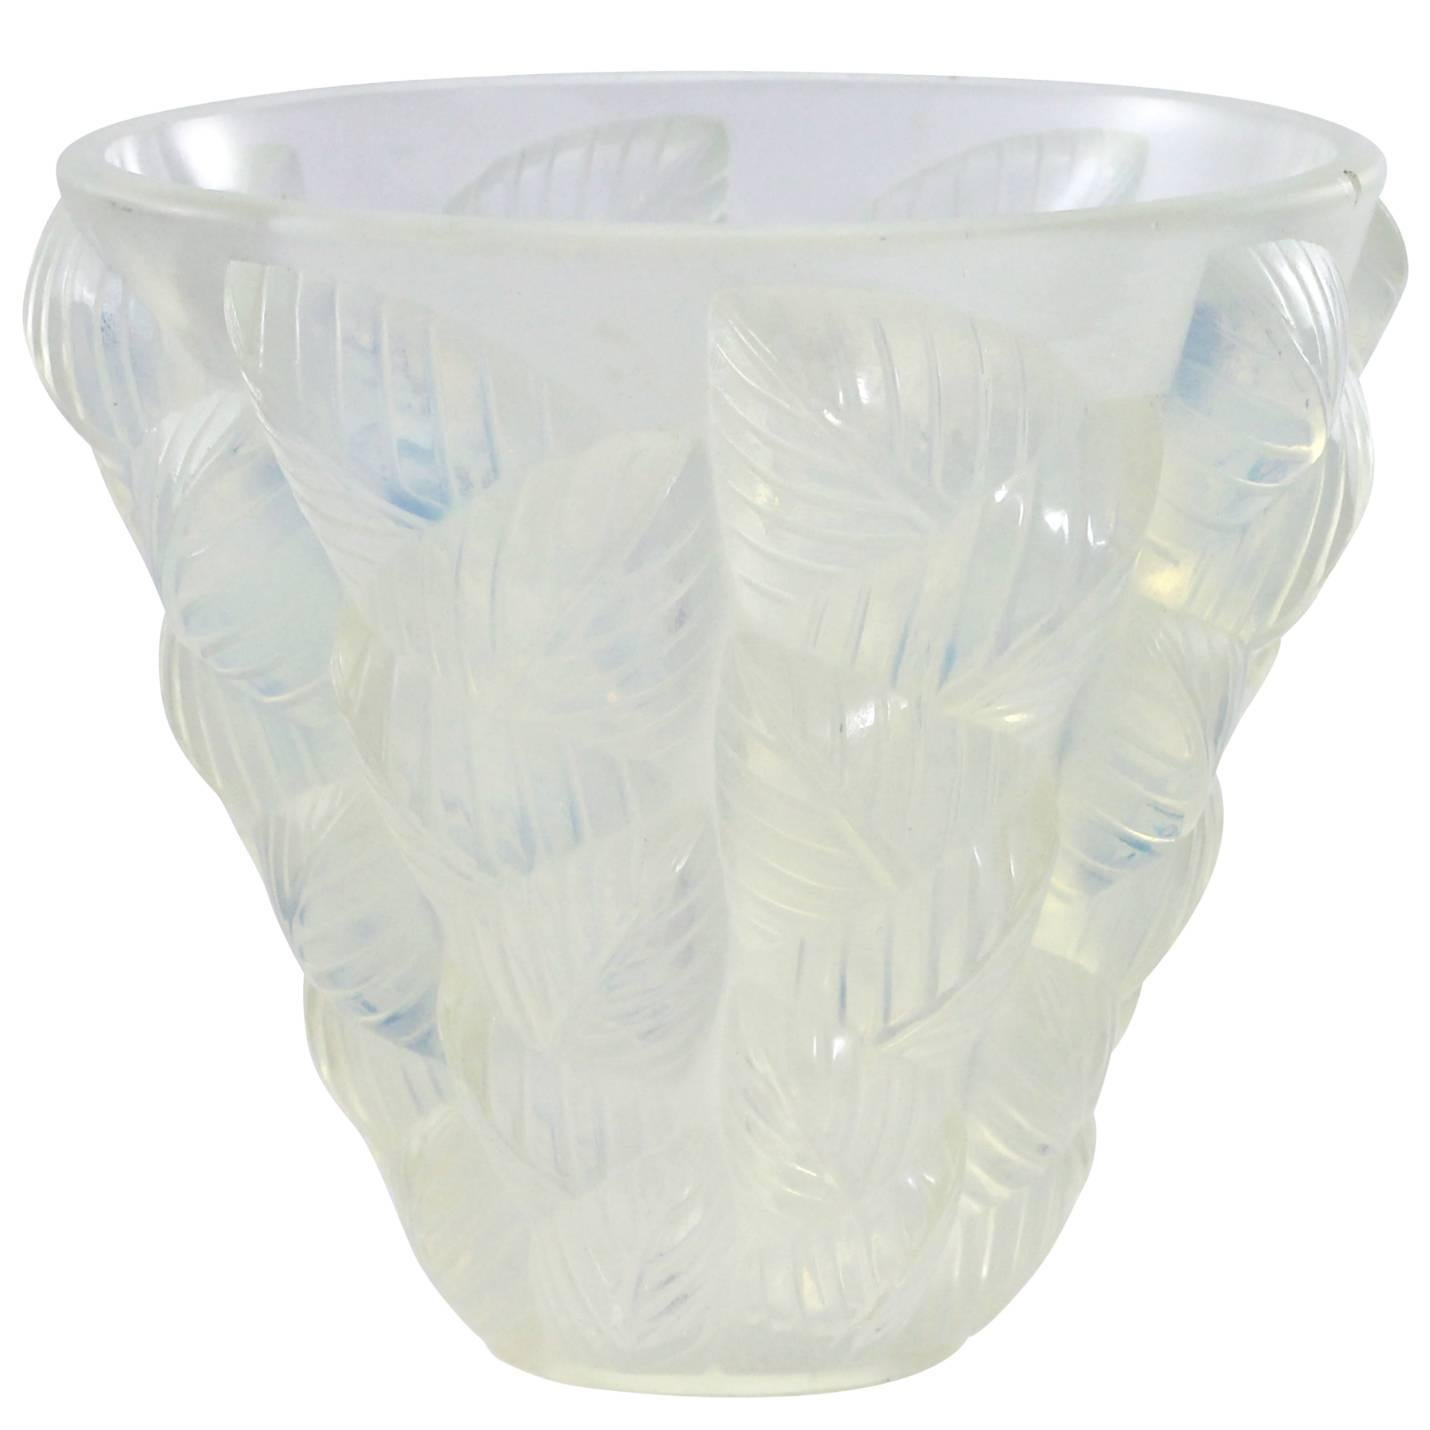 Early 20th Century Art Deco 'Moissac' Opalescent Glass Vase by René Lalique For Sale